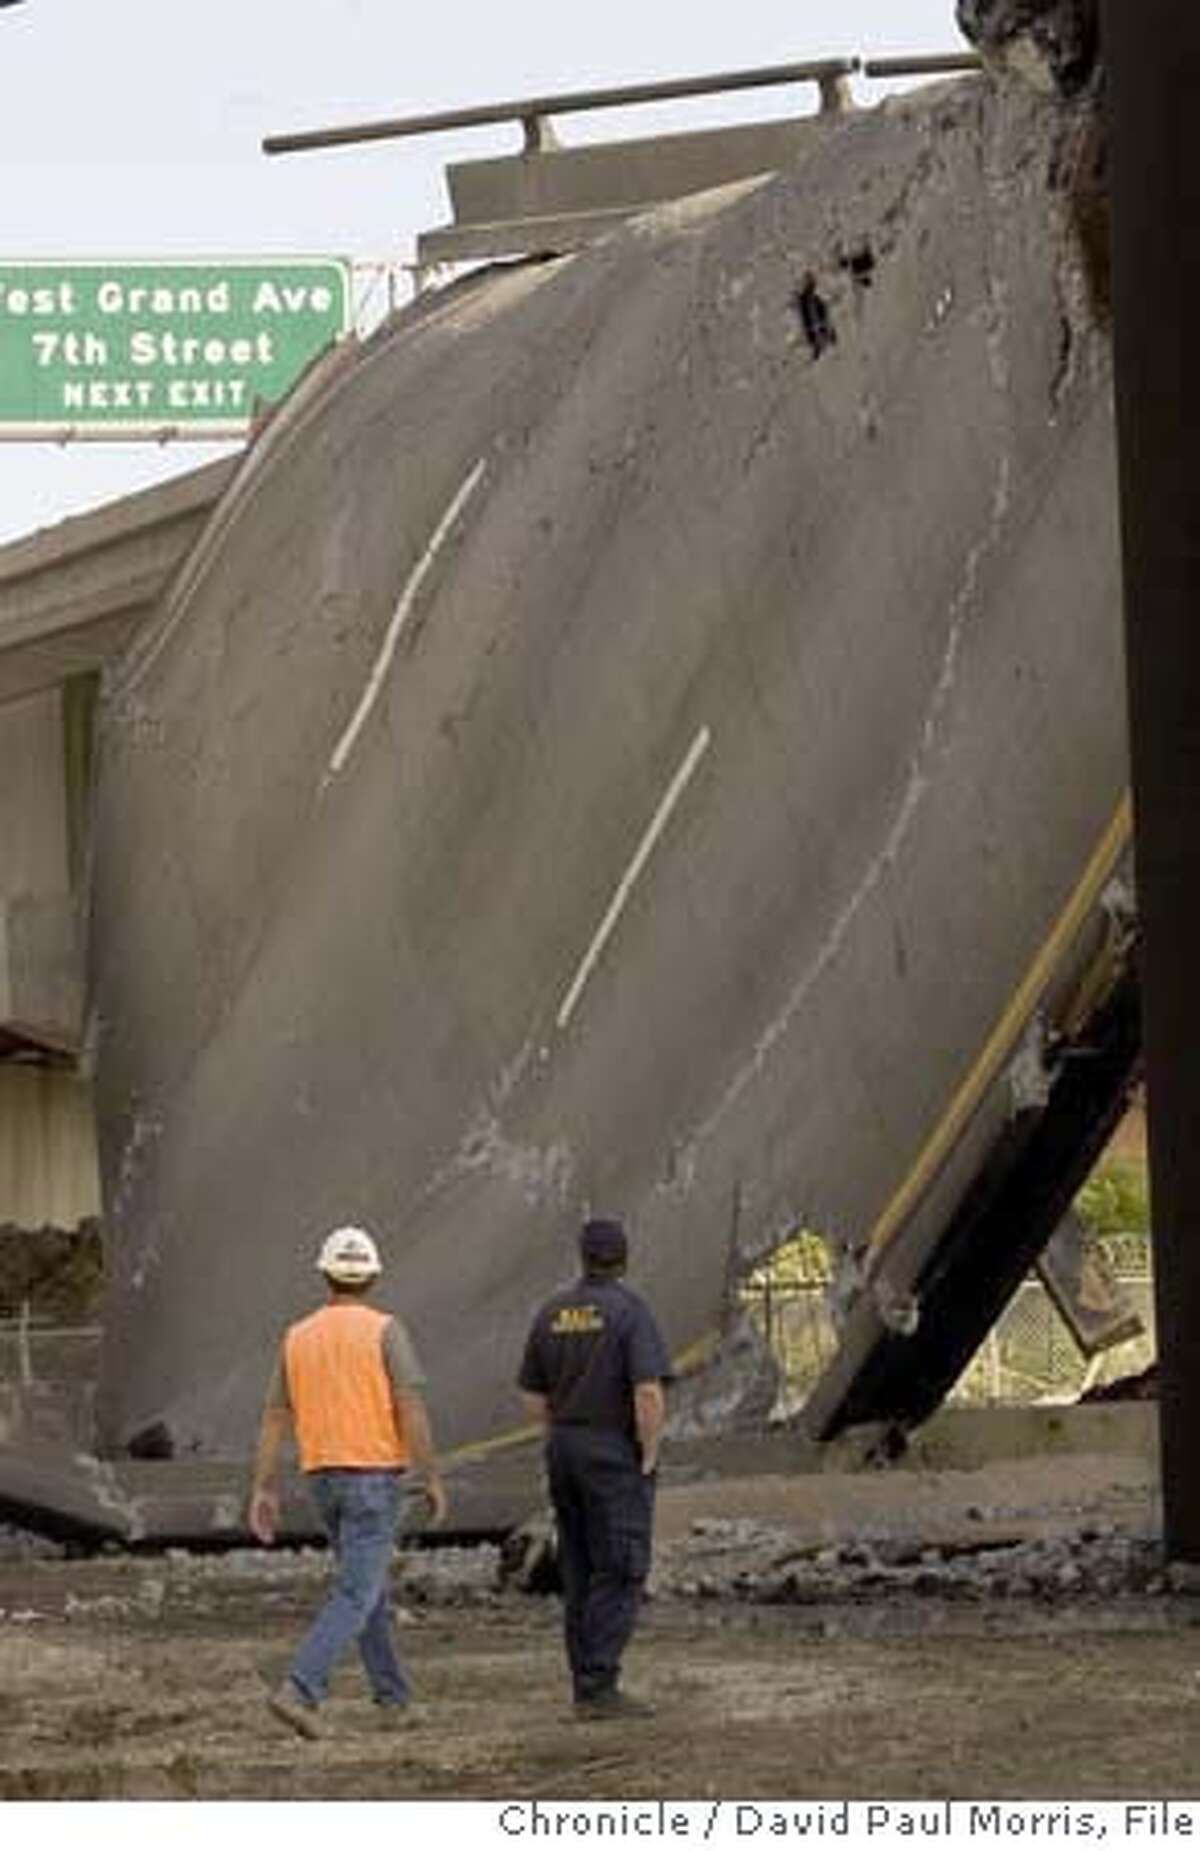 Emeryville CA - APRIL 29: Caltrans workers along with federal investigators look over the damage to the 580 hwy on April 29, 2007 in Emeryville, California. A tanker truck crashed and burned causing the elevated roadway that carried eastbound traffic from the Bay Bridge onto Interstates 580 and 980 and state Highway 24 to melt and crumble to the ground.(Photo by David Paul Morris/The Chronicle)